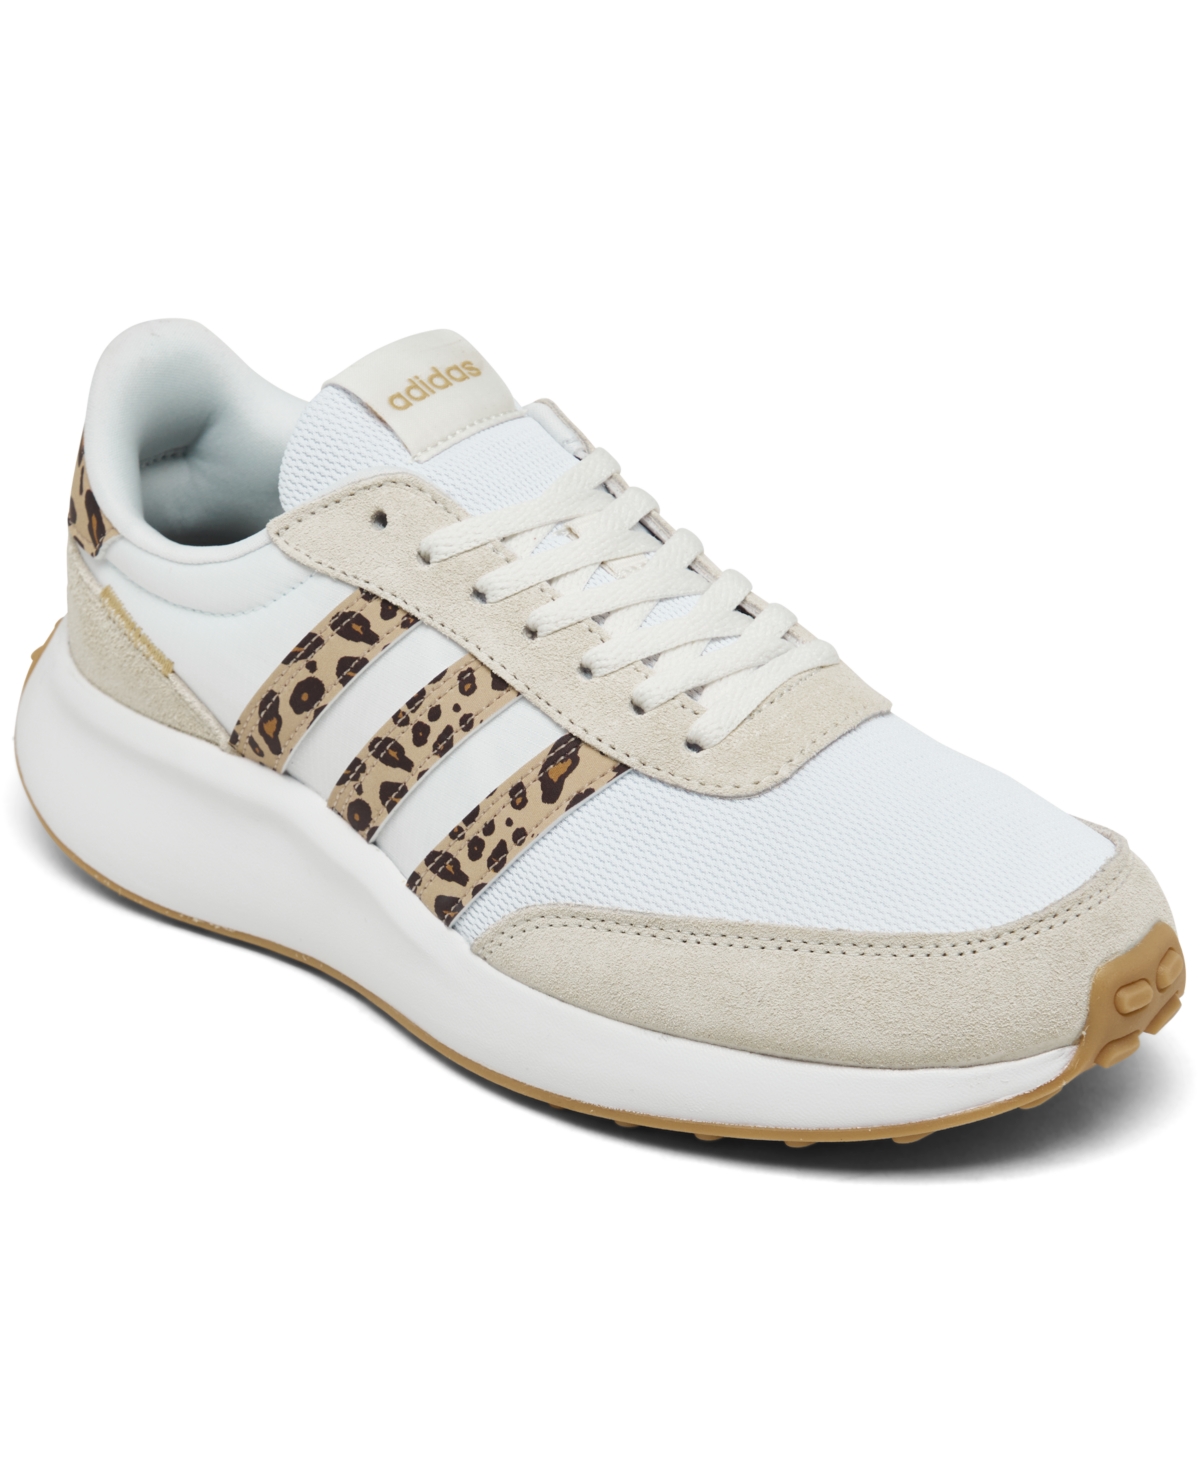 ADIDAS ORIGINALS WOMEN'S RUN 70S CASUAL SNEAKERS FROM FINISH LINE